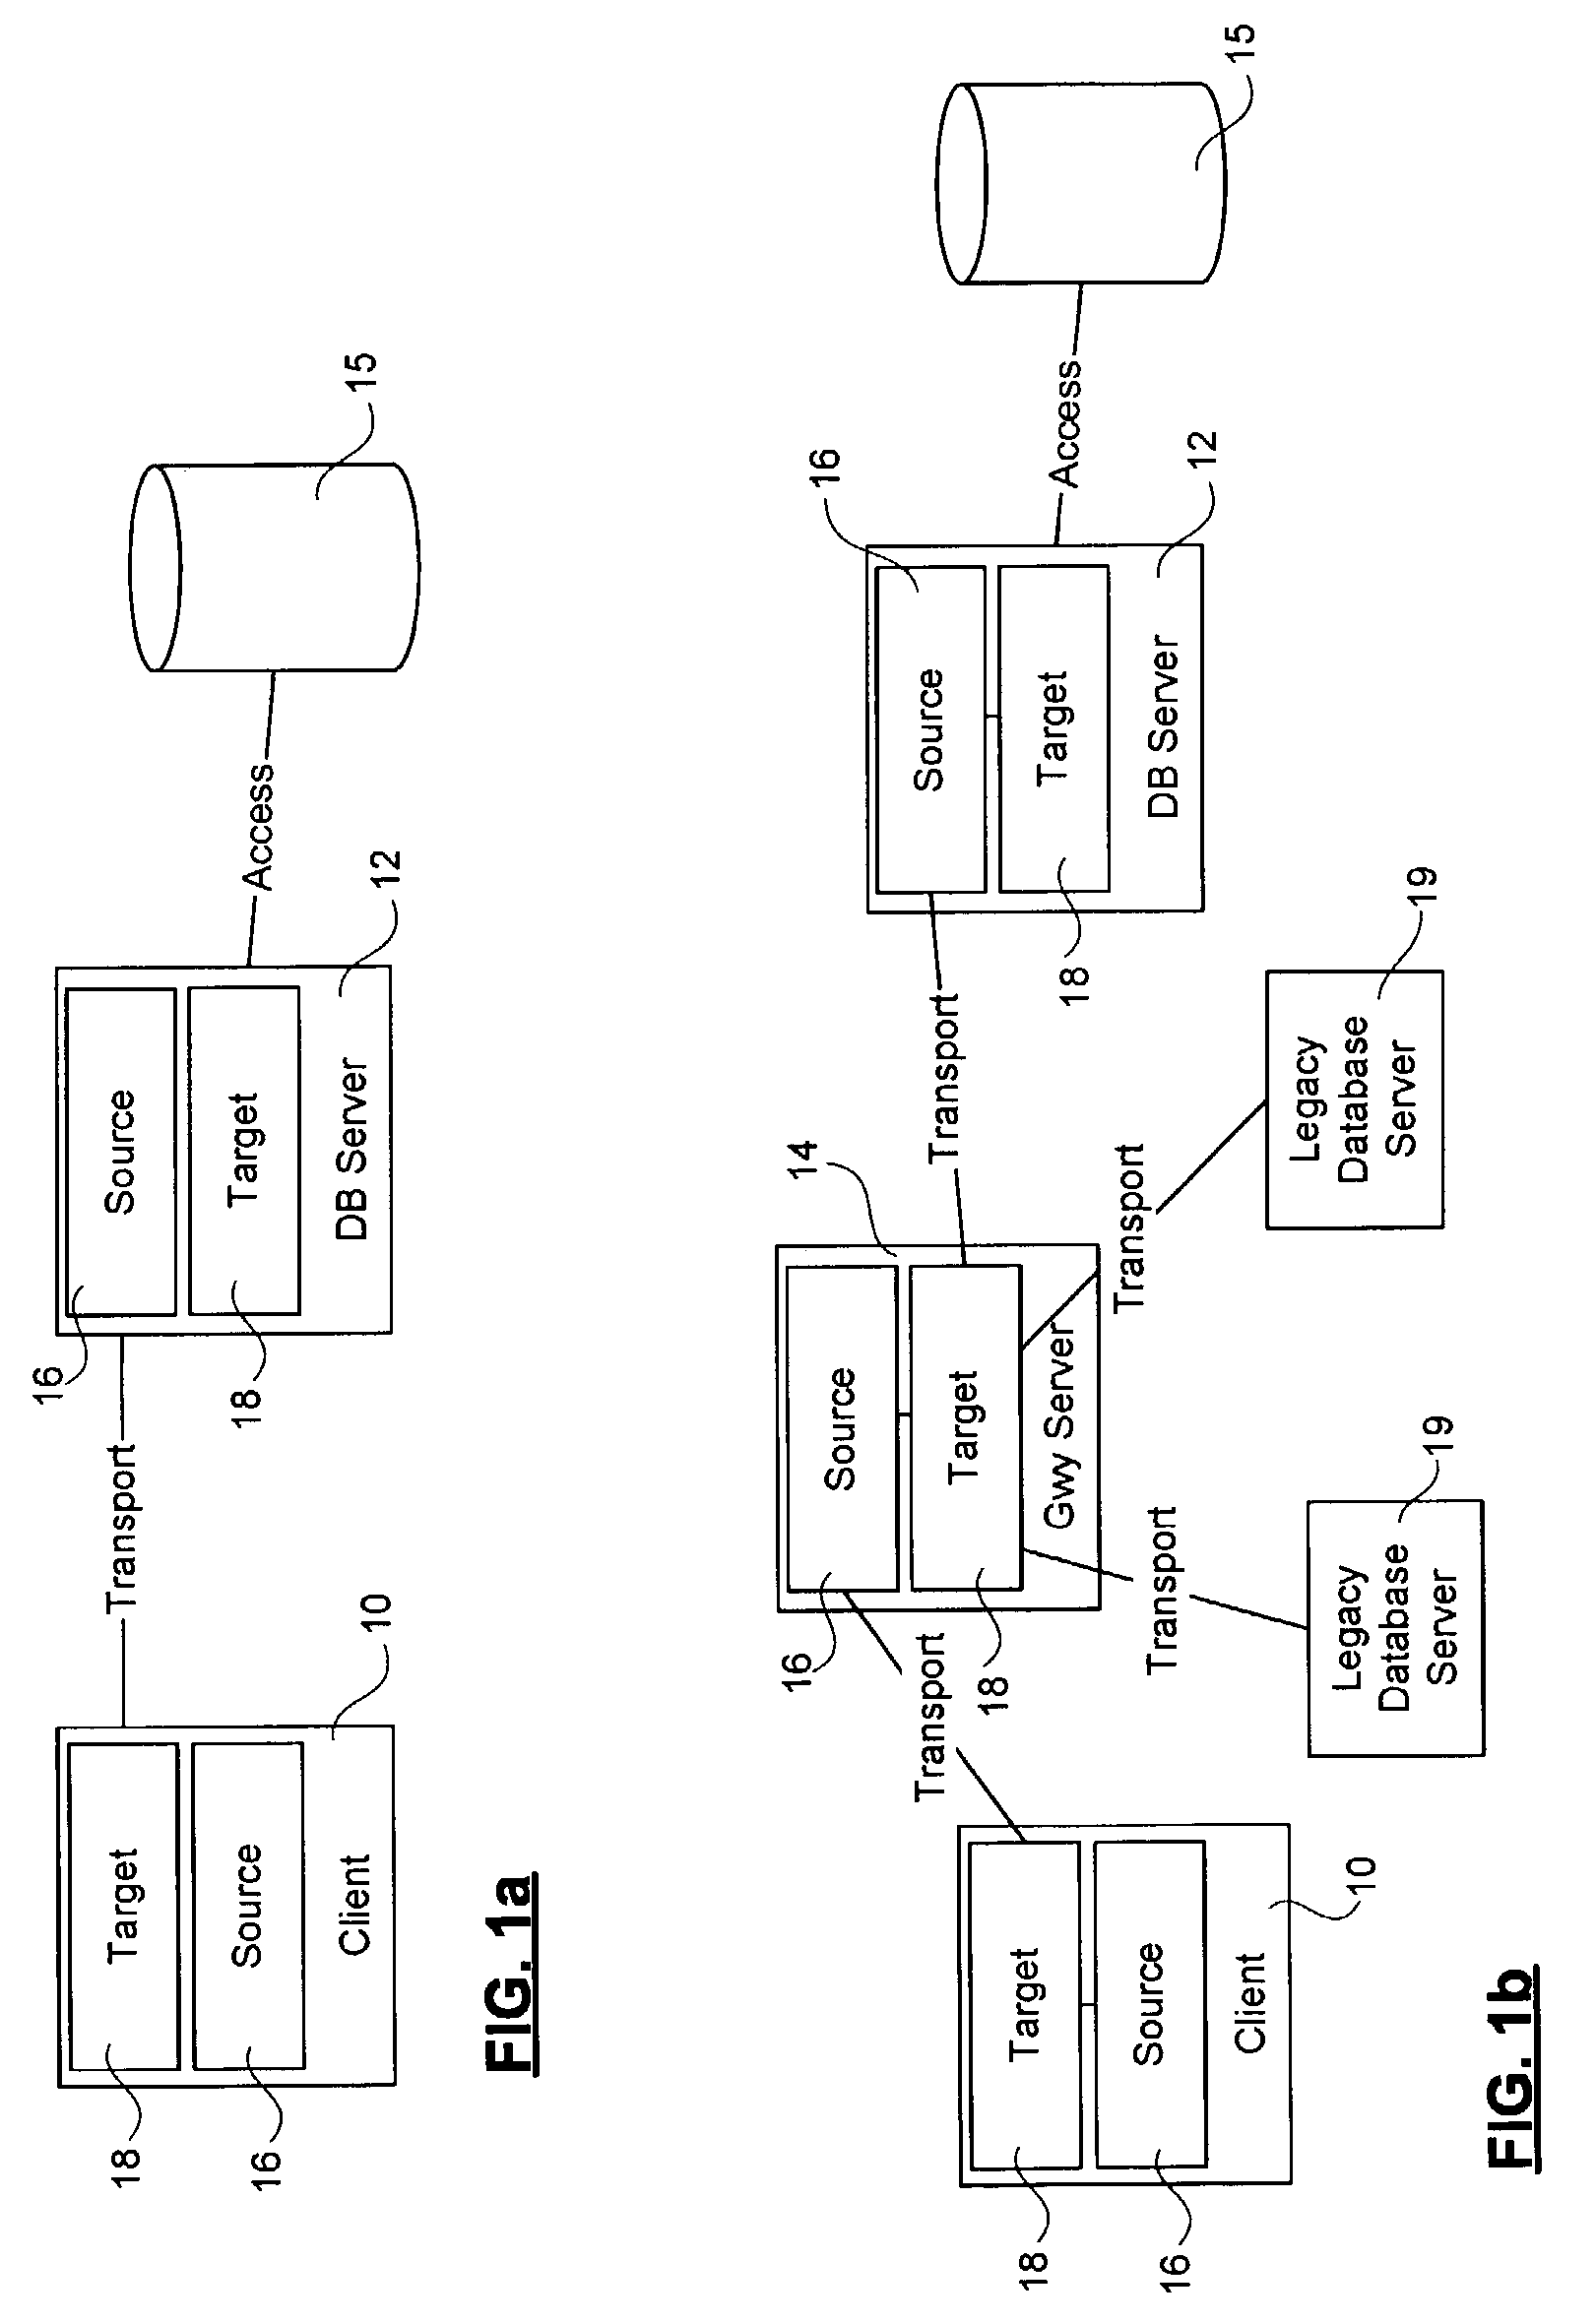 System and method for enabling efficient multi-protocol database transaction processing